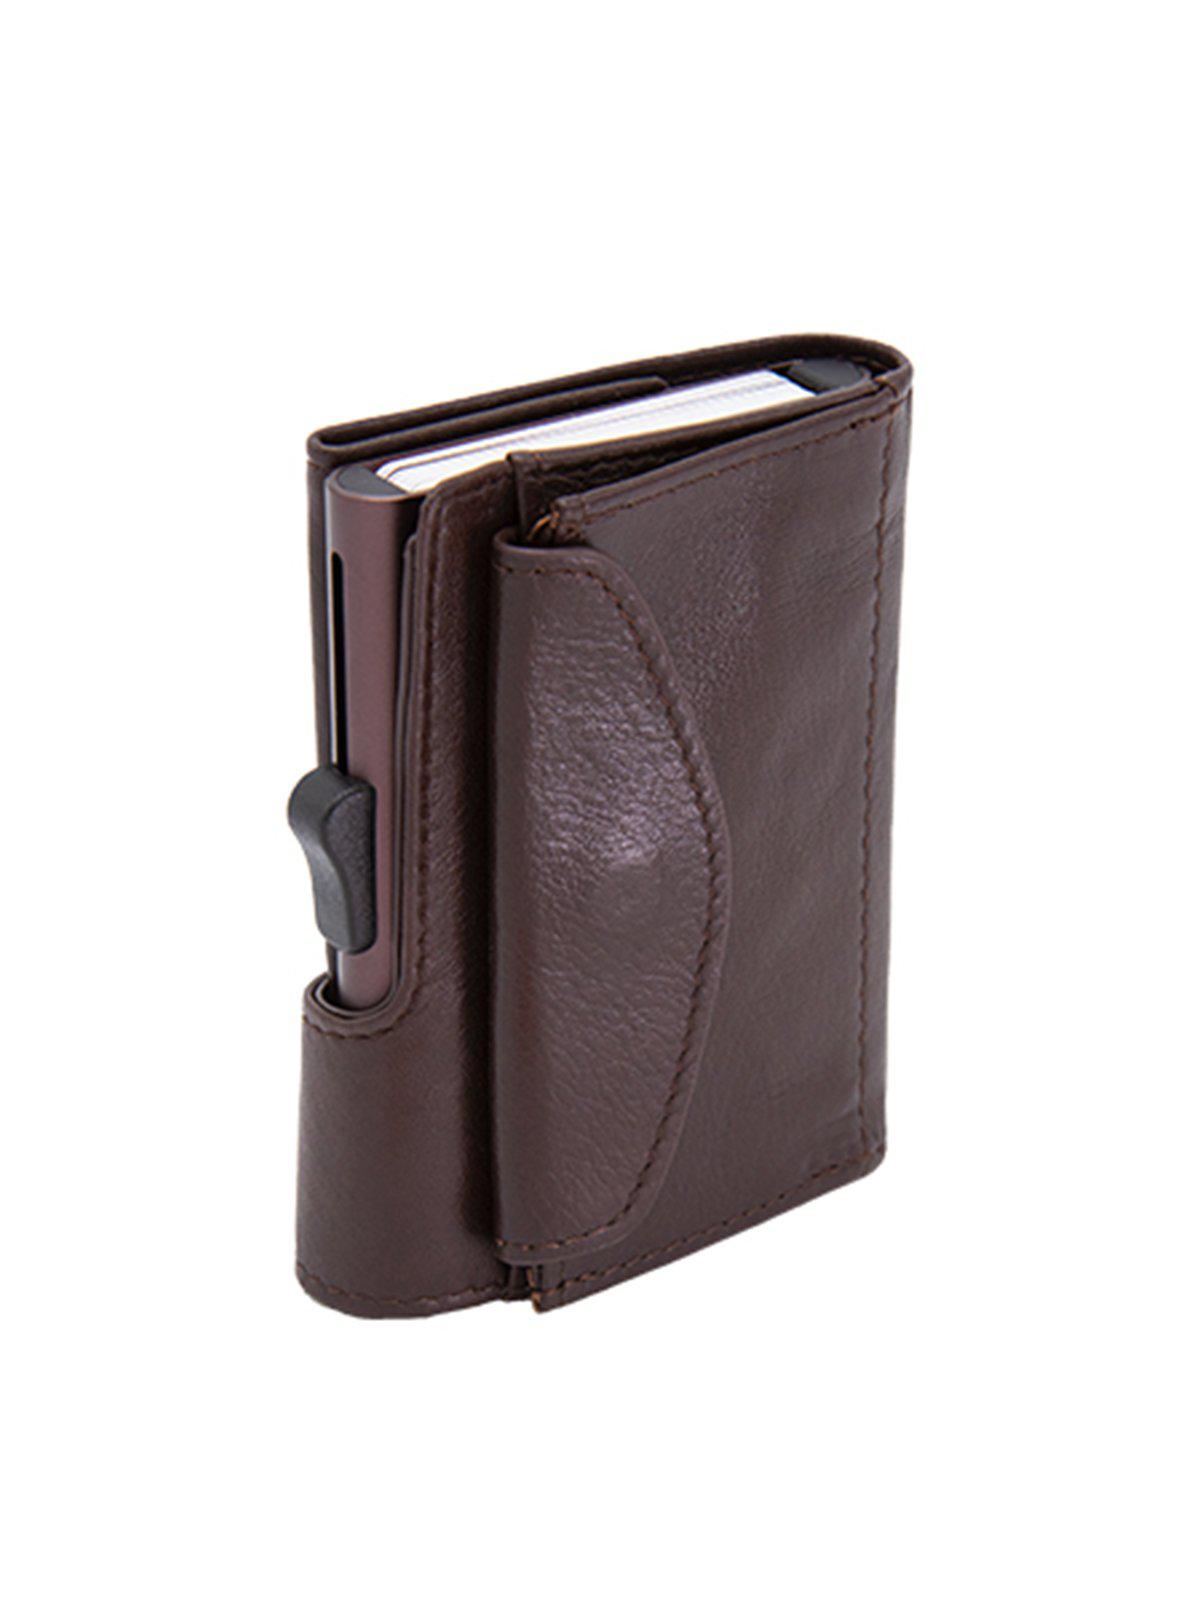 C-Secure XL Italian Leather Wallet with Coin Pouch RFID Mogano Brown - MORE by Morello Indonesia